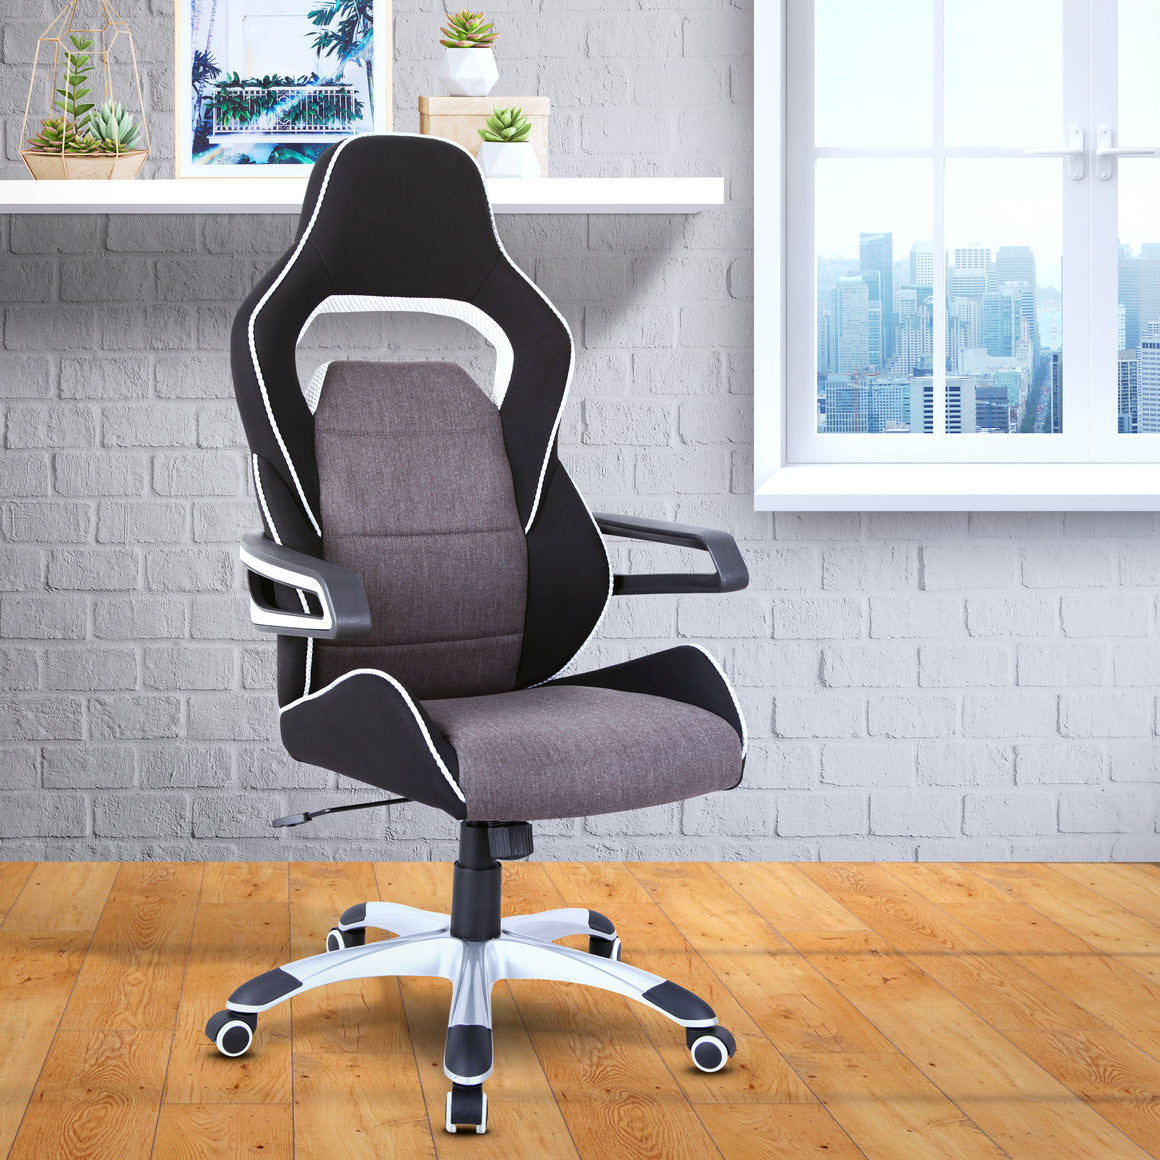 Ergonomic Upholstered Racing Style Office & Home Office Chair